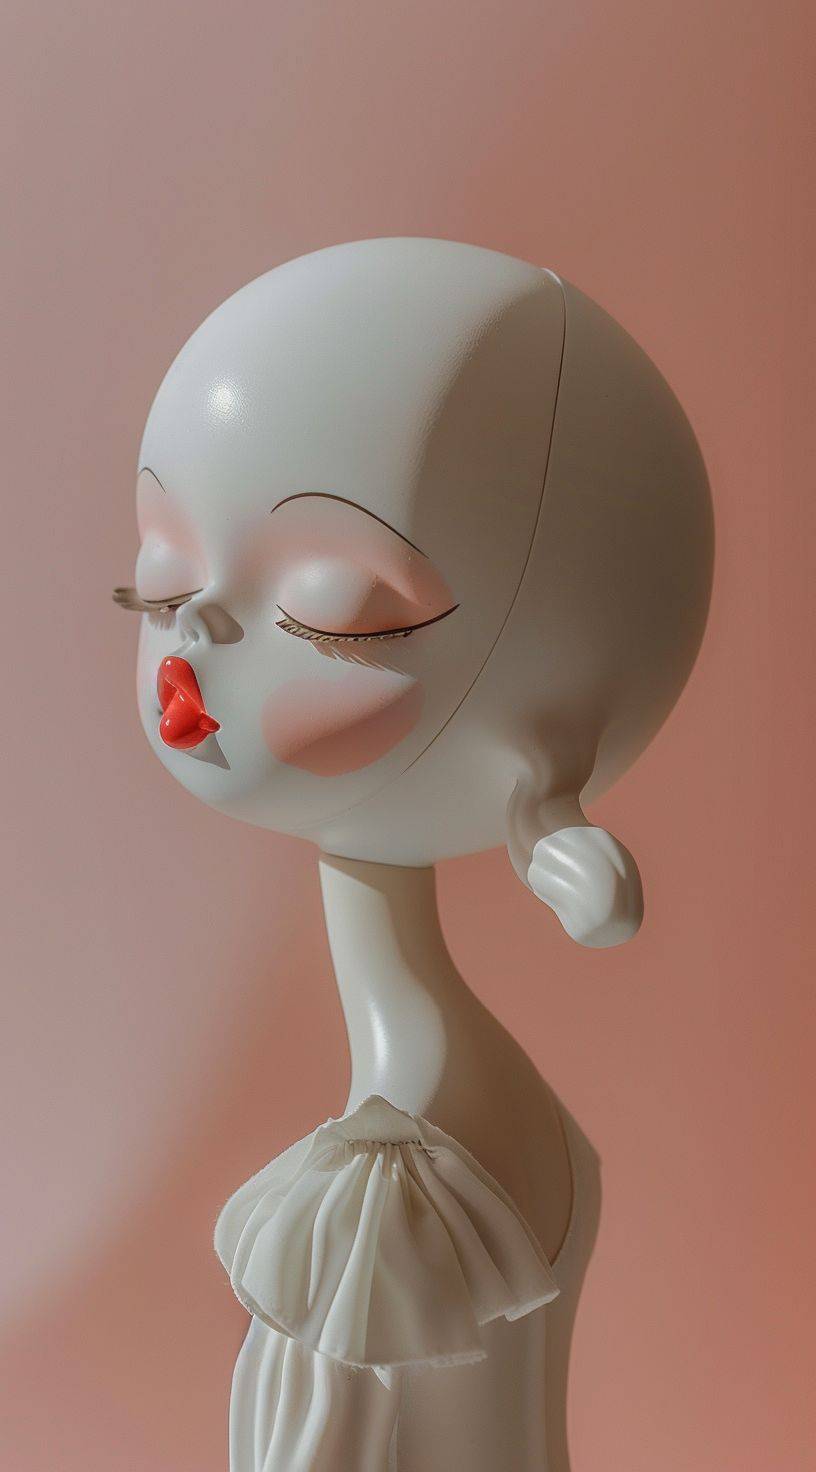 Surrealistic cartoon character with a white and pink color scheme in a low angle shot with exaggerated facial features, wearing a white dress with an open collar and mouth to kiss against a pink background wall in the blind box toy style, a sculptural doll in the shape of an egg with short hair in the blindbox art doll style, with pink painted skin tone in a head closeup, light gray textured skin, hair gently curved around the face, pink lips, closed eyes, long eyelashes, slender eyebrows, and slightly curly bangs in the style of pink painted skin tone.